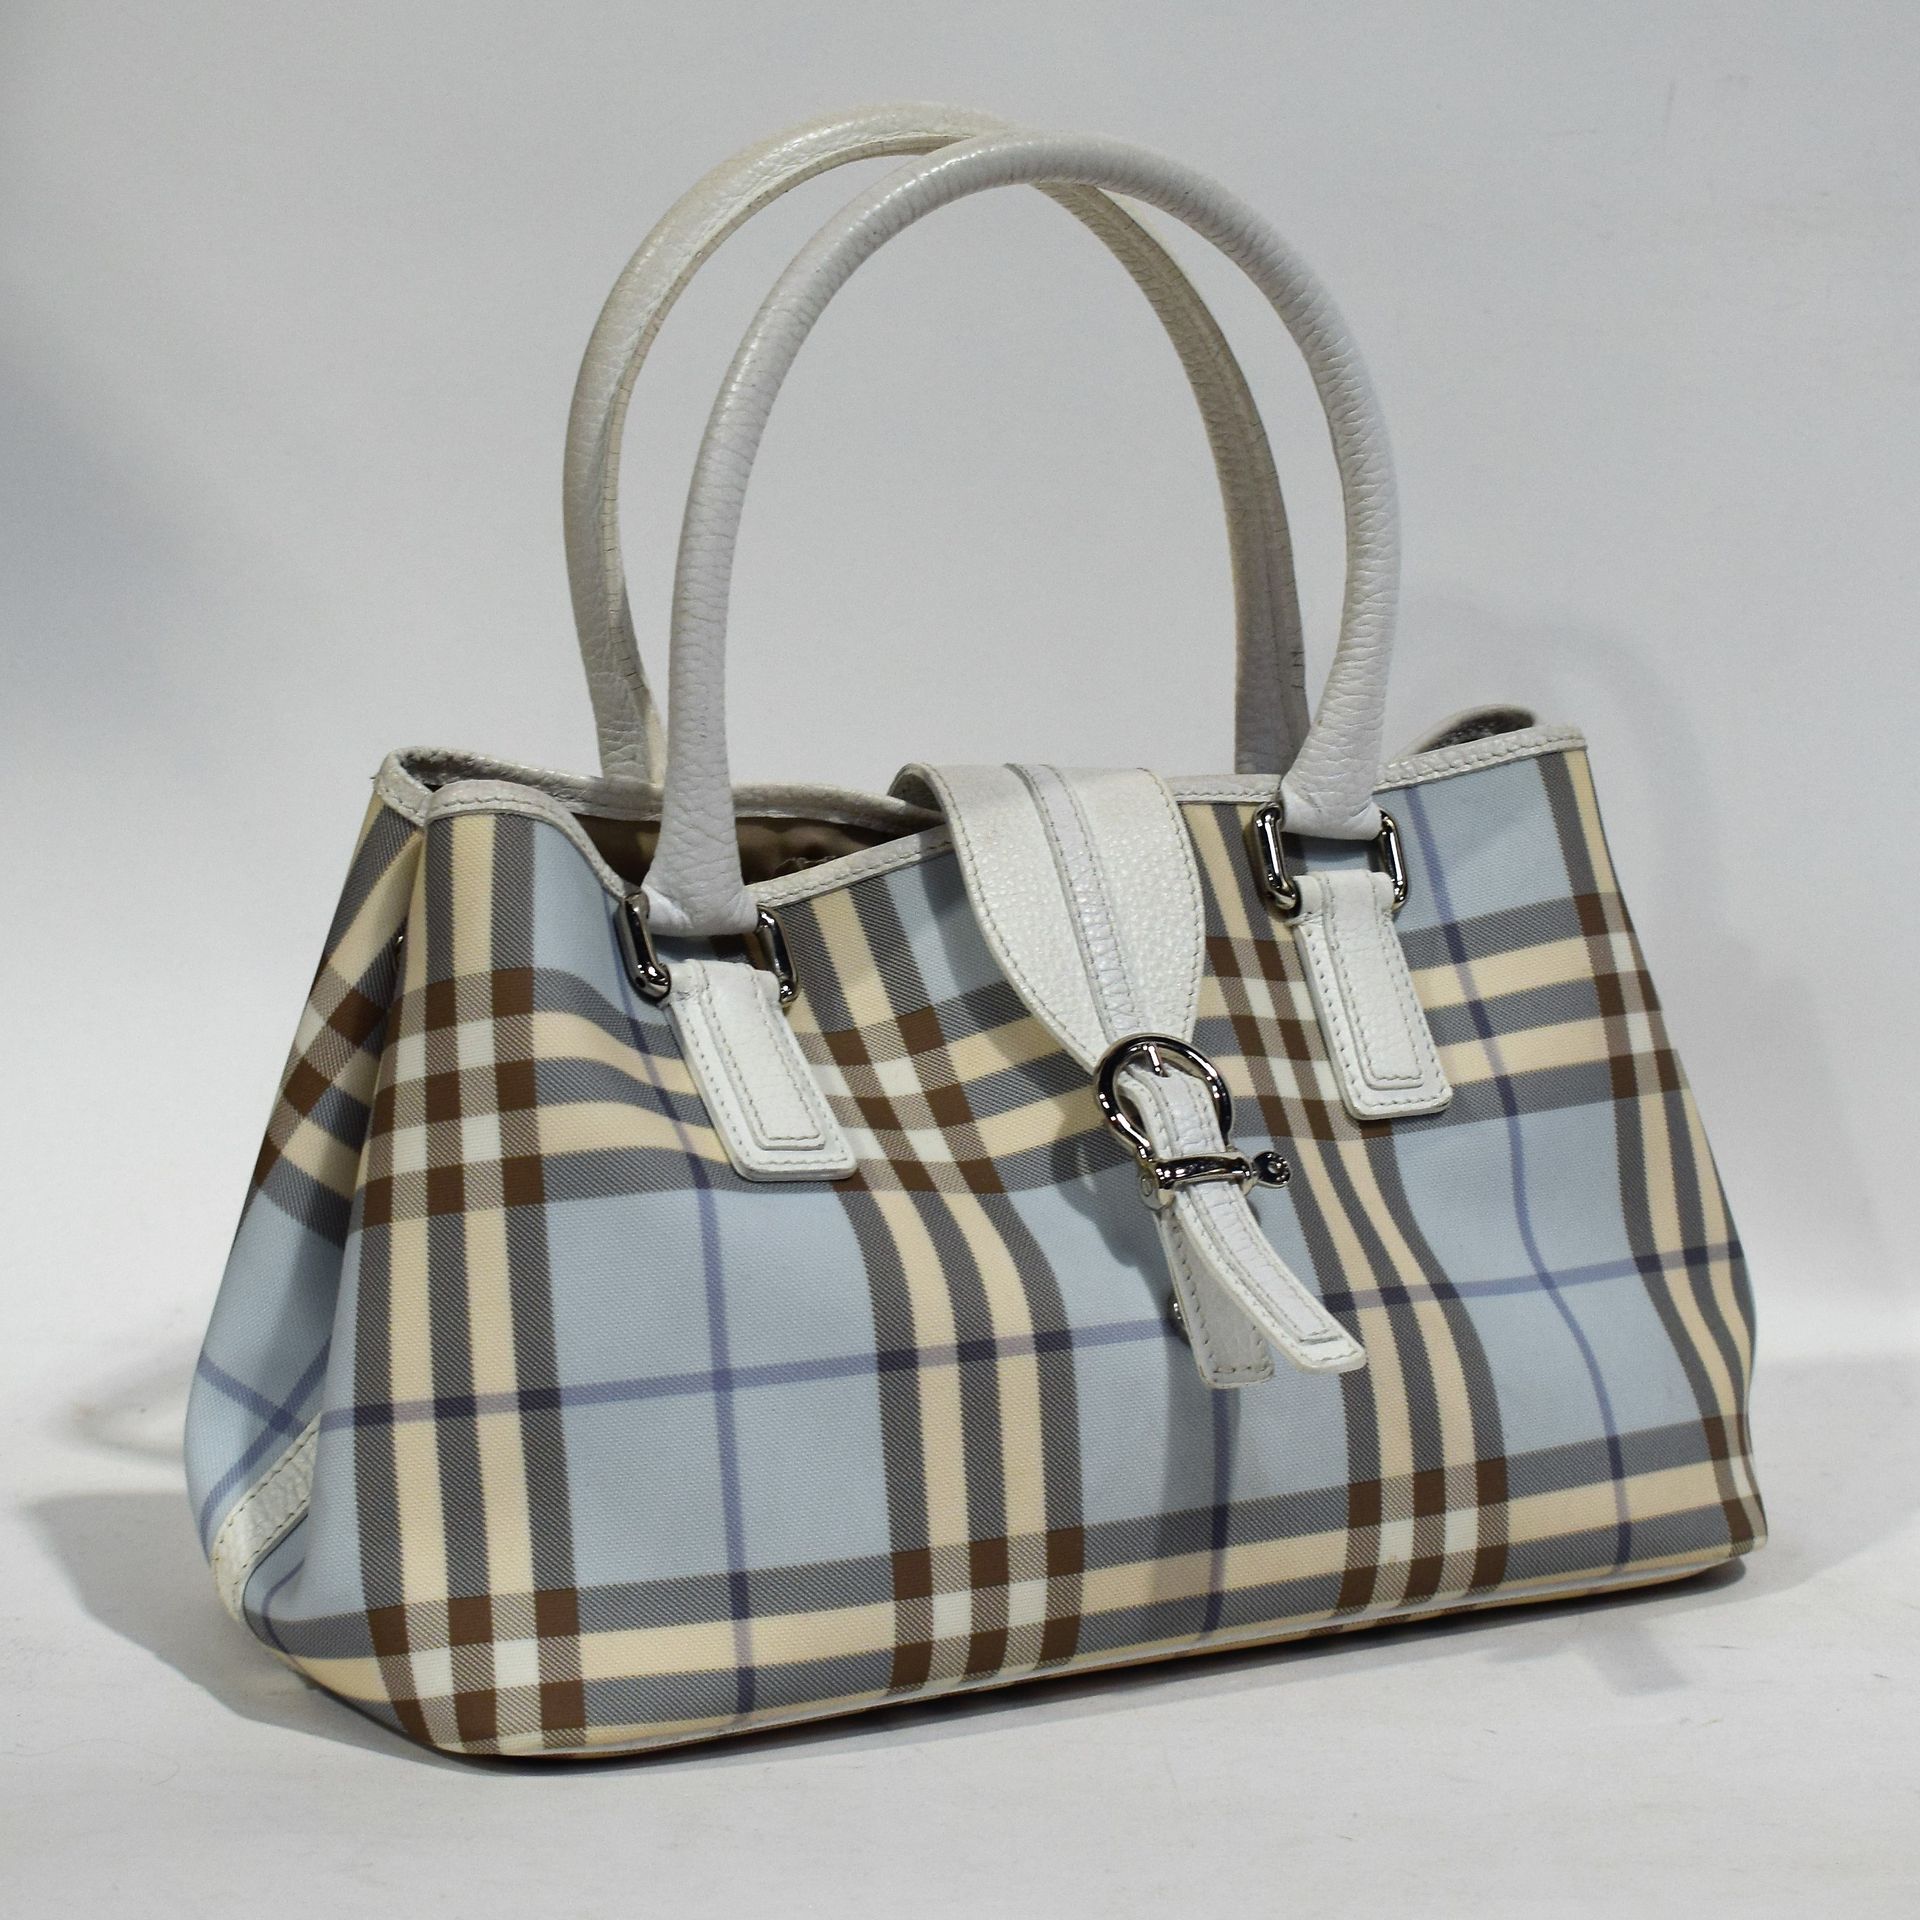 Null BURBERRY
Burberry blue and beige tartan handbag, white leather handles and &hellip;